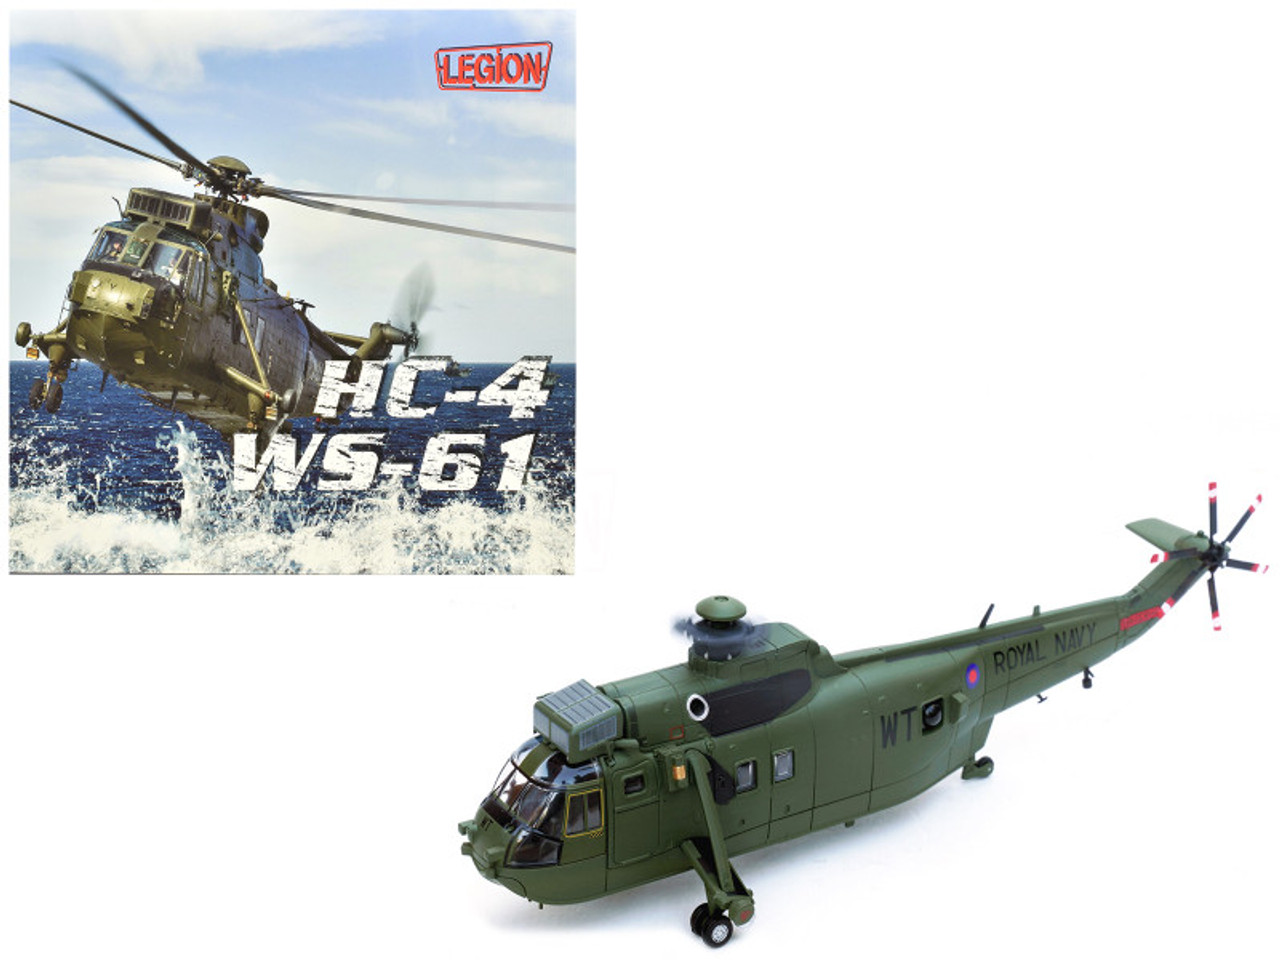 Westland Sea King HC.4 Helicopter "Green Livery 848 Naval Air Squadron Commando Helicopter Force Royal Naval Air Station Yeovilton Somerset" (2009) British Royal Navy 1/72 Diecast Model by Legion